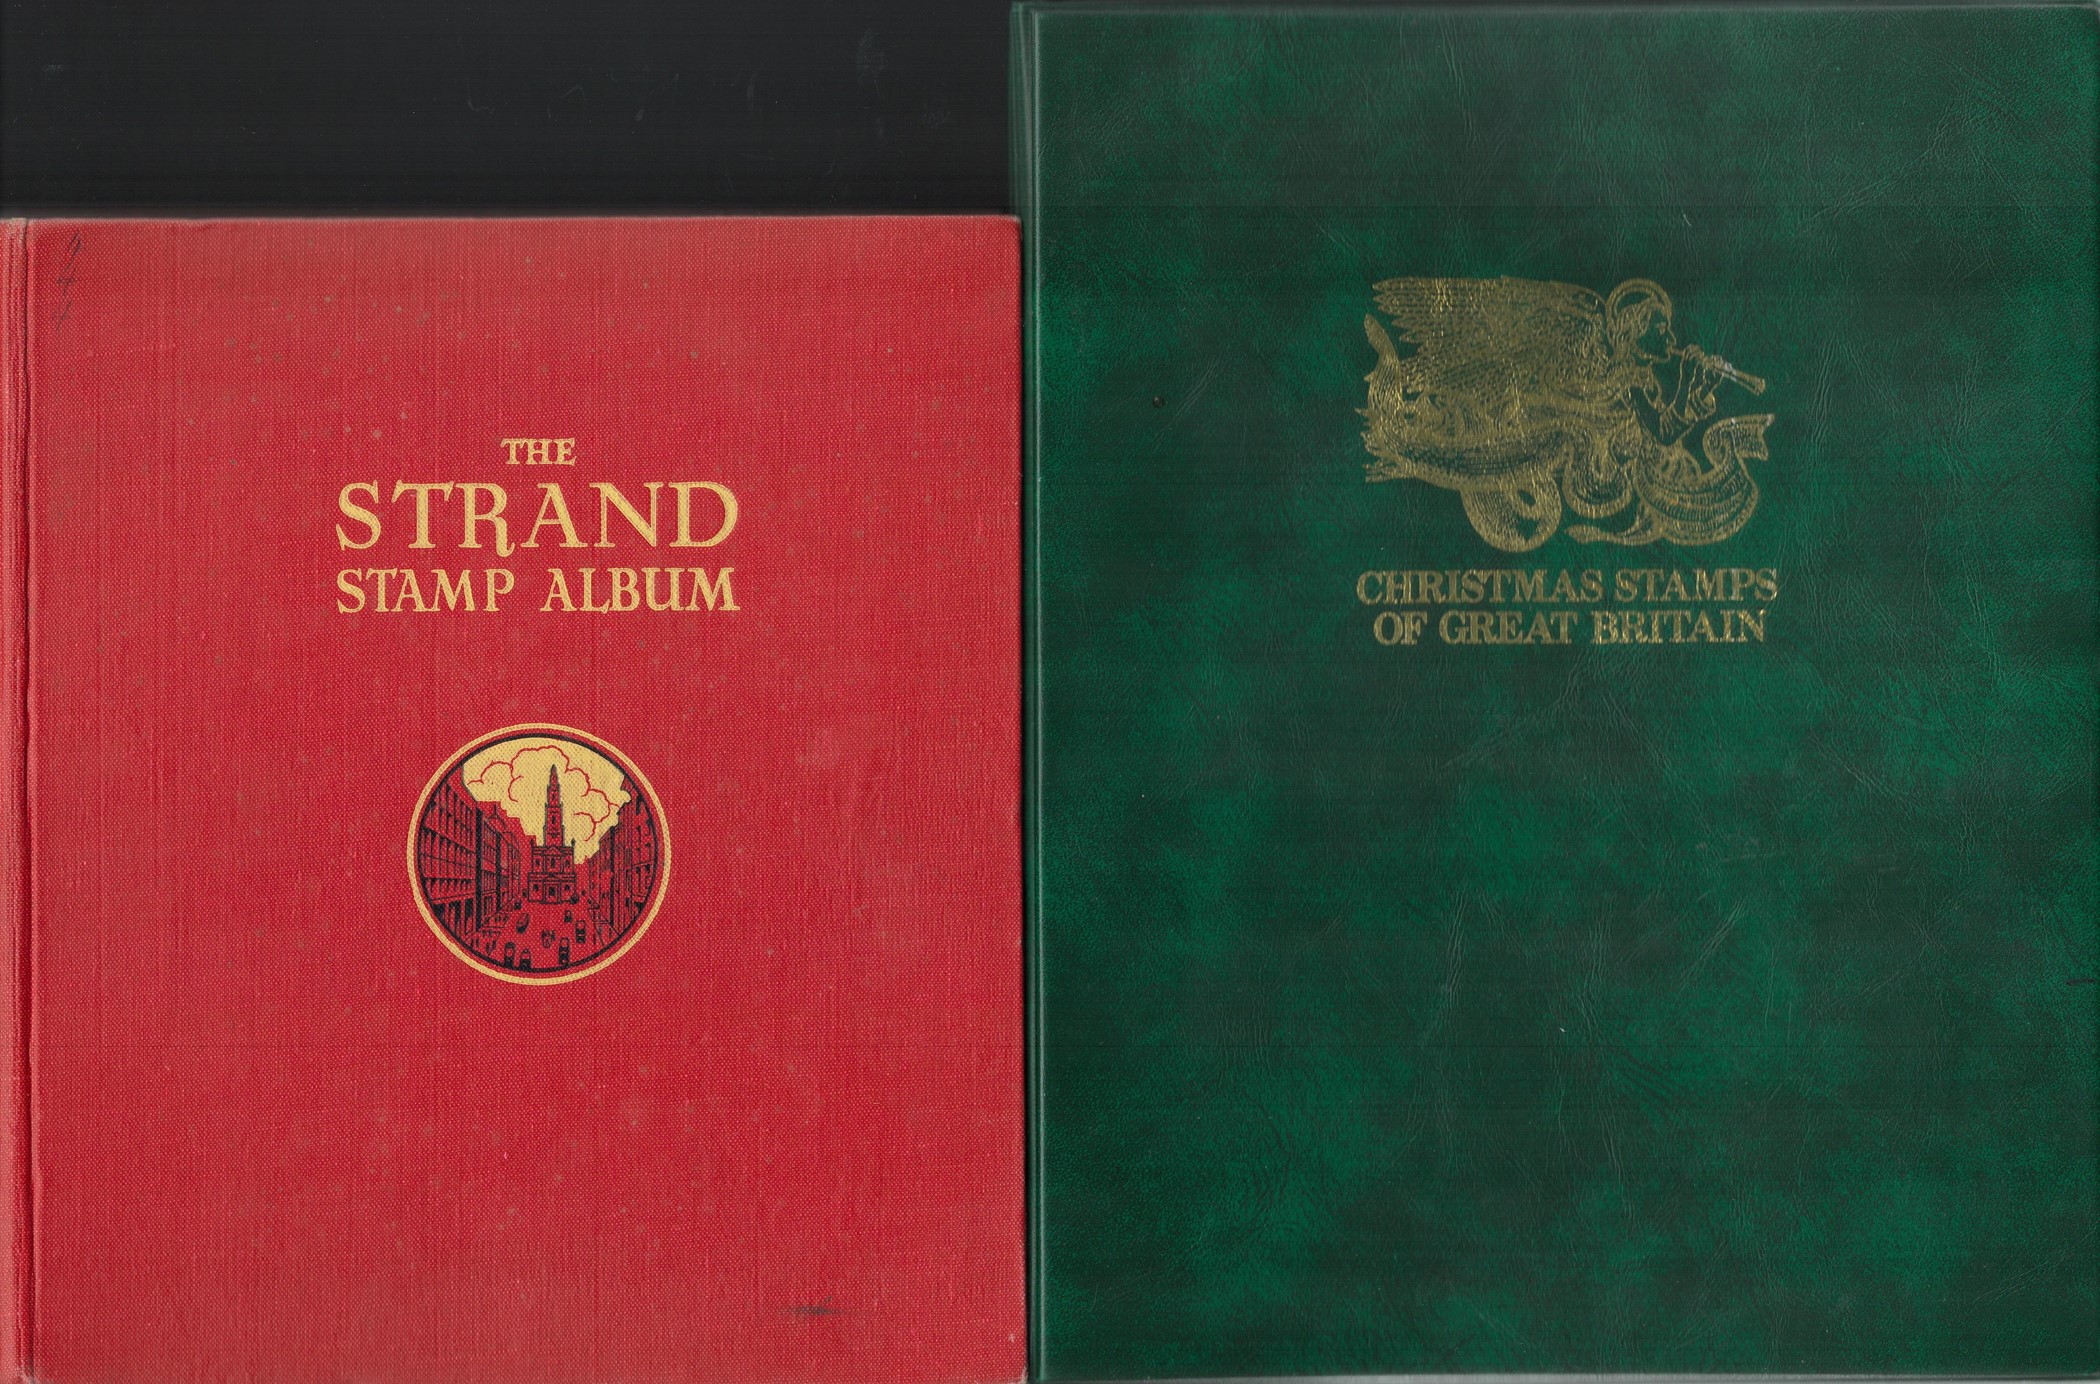 Stanley Gibbons - Strand stamp album with a few stamps. Also comes with another album containing